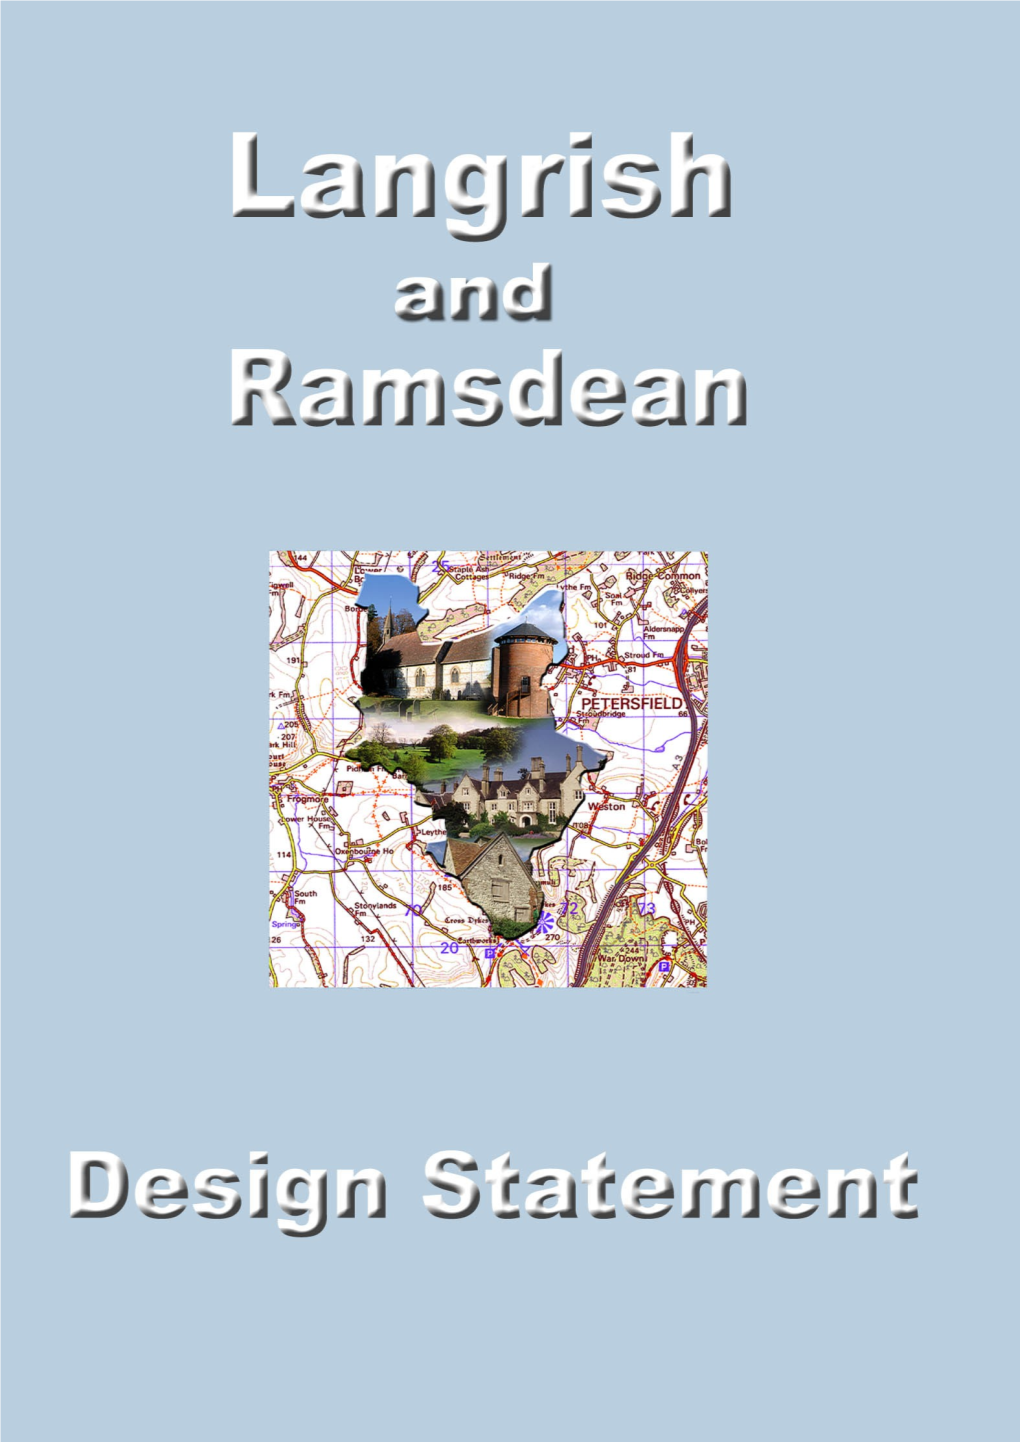 Introduction to the Design Statement